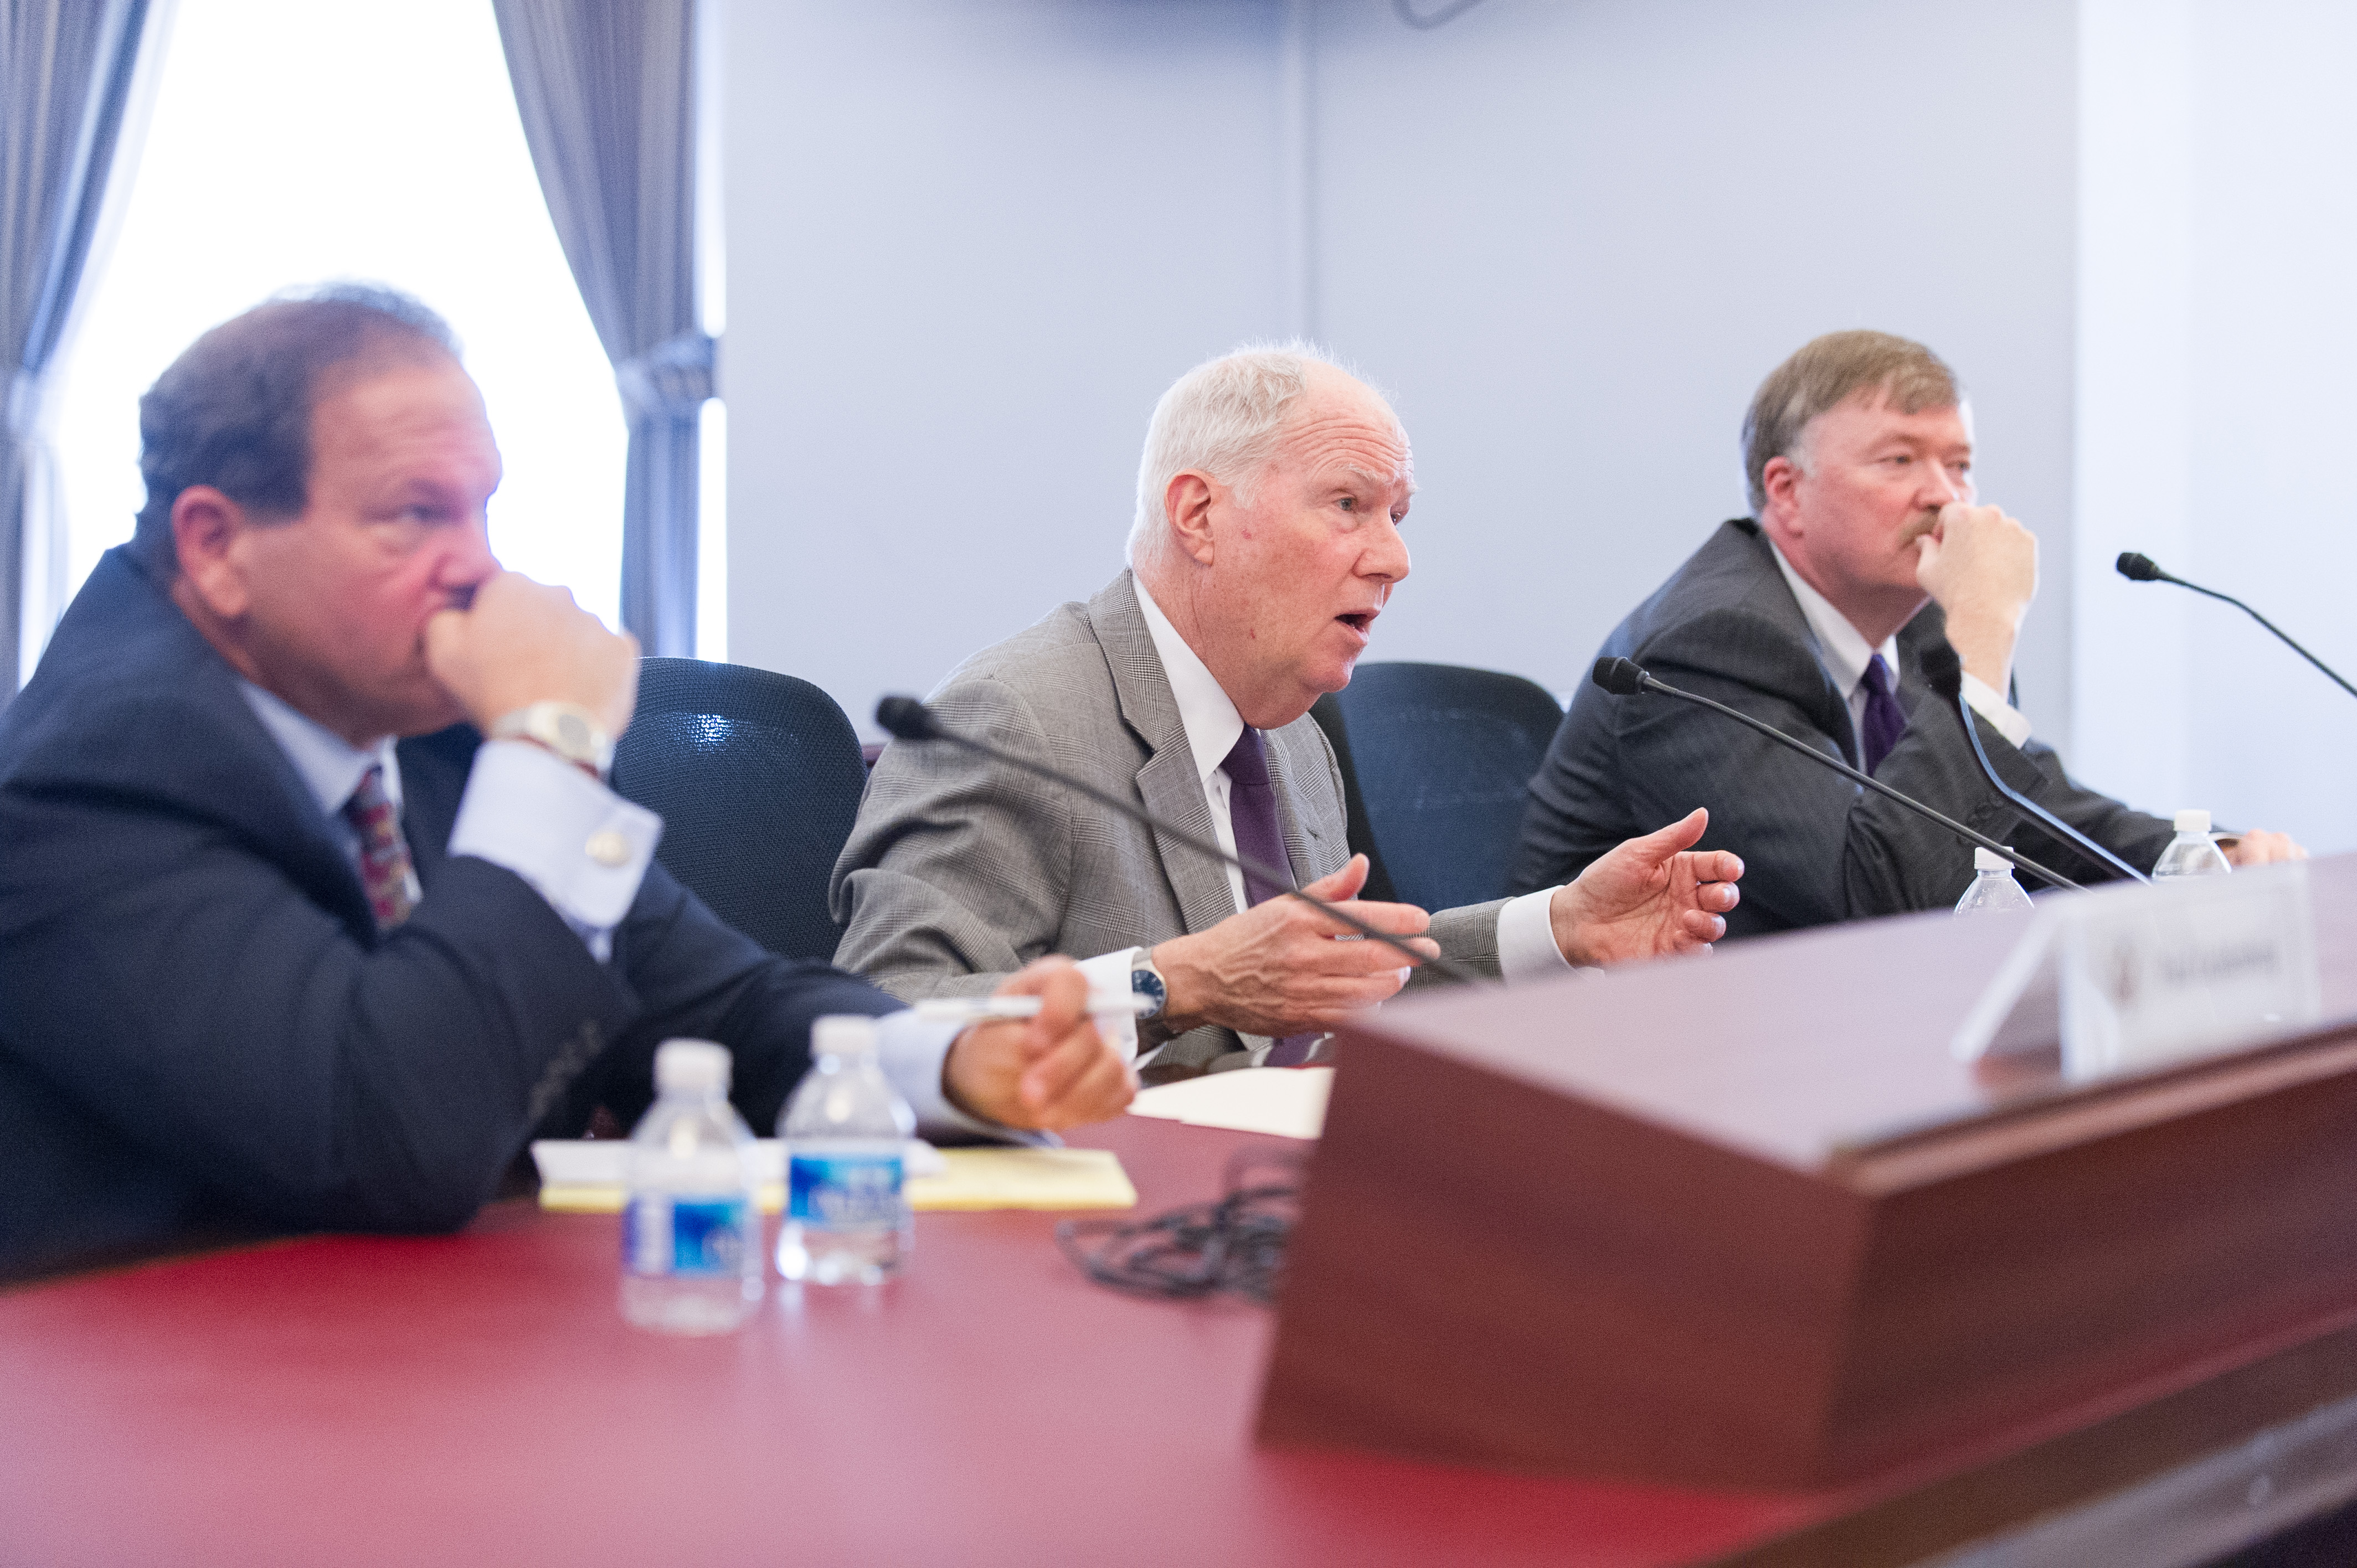 L-R, Paul Goldenberg, Andy Baker and John Farmer testify at a Congressional hearing on anti-Semitism on April 19 2016. (Courtesy U.S. Helsinki Commission)